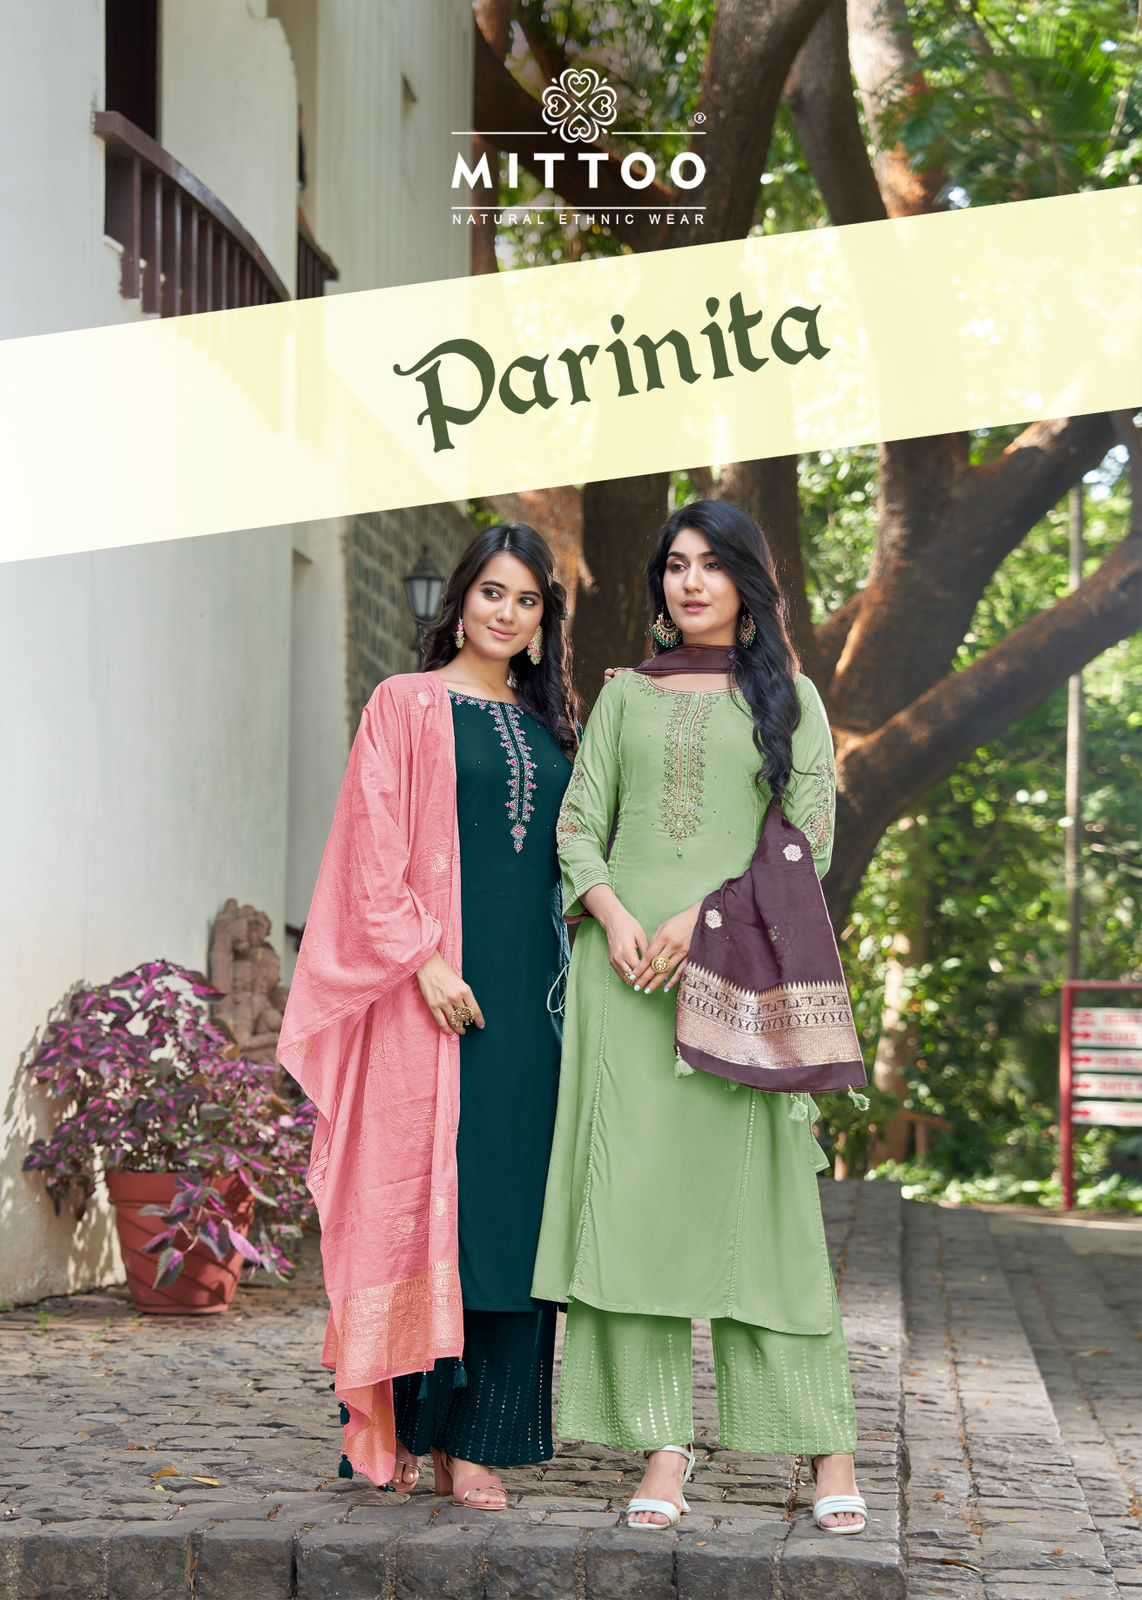 MITTOO PRESENT PARINITA READYMADE FANCY TOP WITH PLAZZO AND DUPATTA CATALOG WHOLESALER AND EXPORTER IN SURAT 